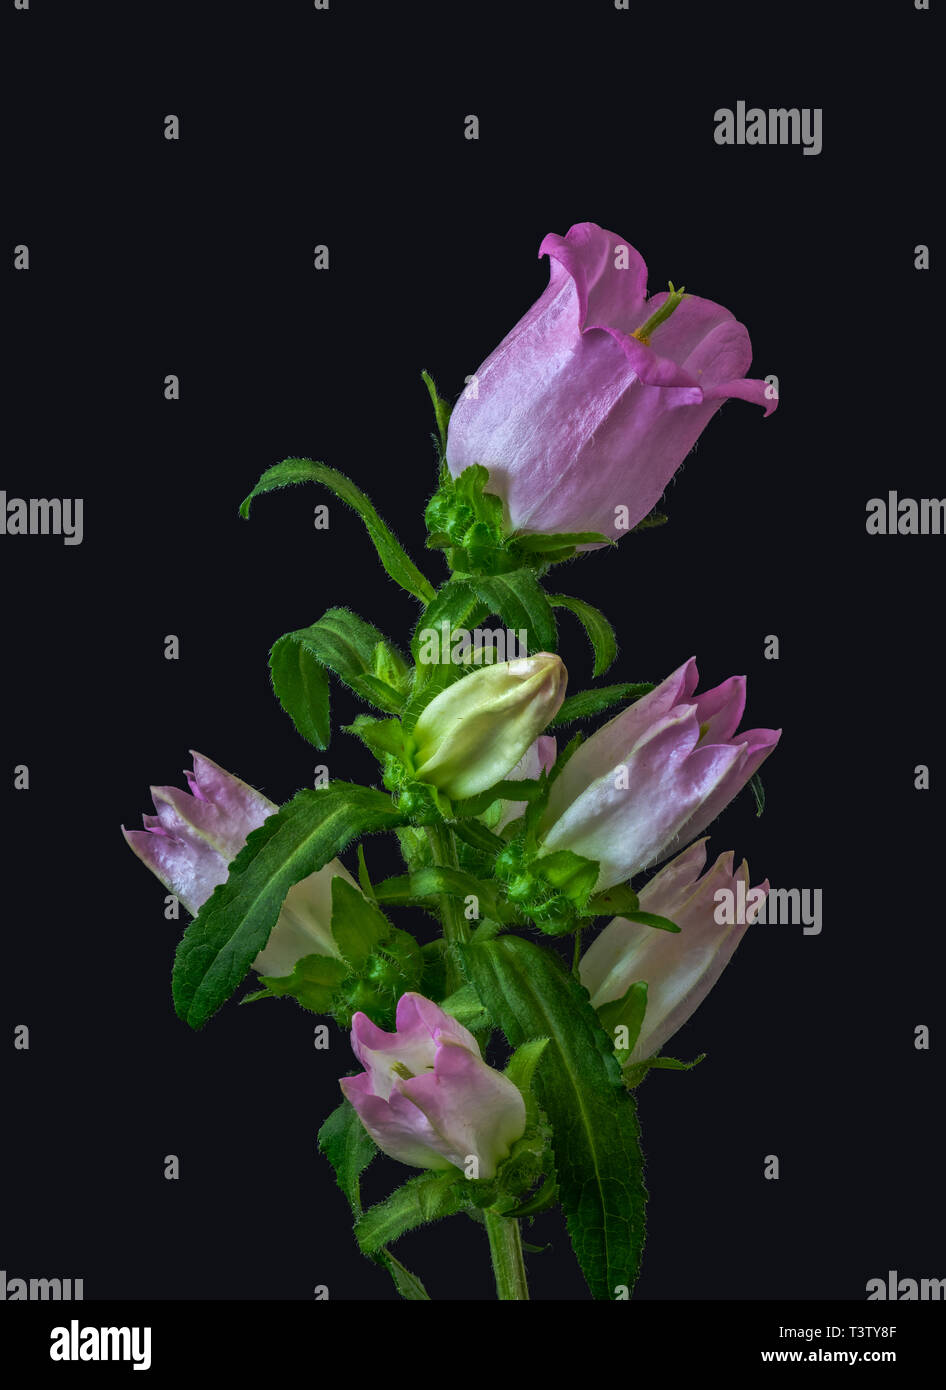 Fine art still life color macro of a single isolated stem of a bellflower/campanula with one open dark pink blossom,several buds and green leaves Stock Photo